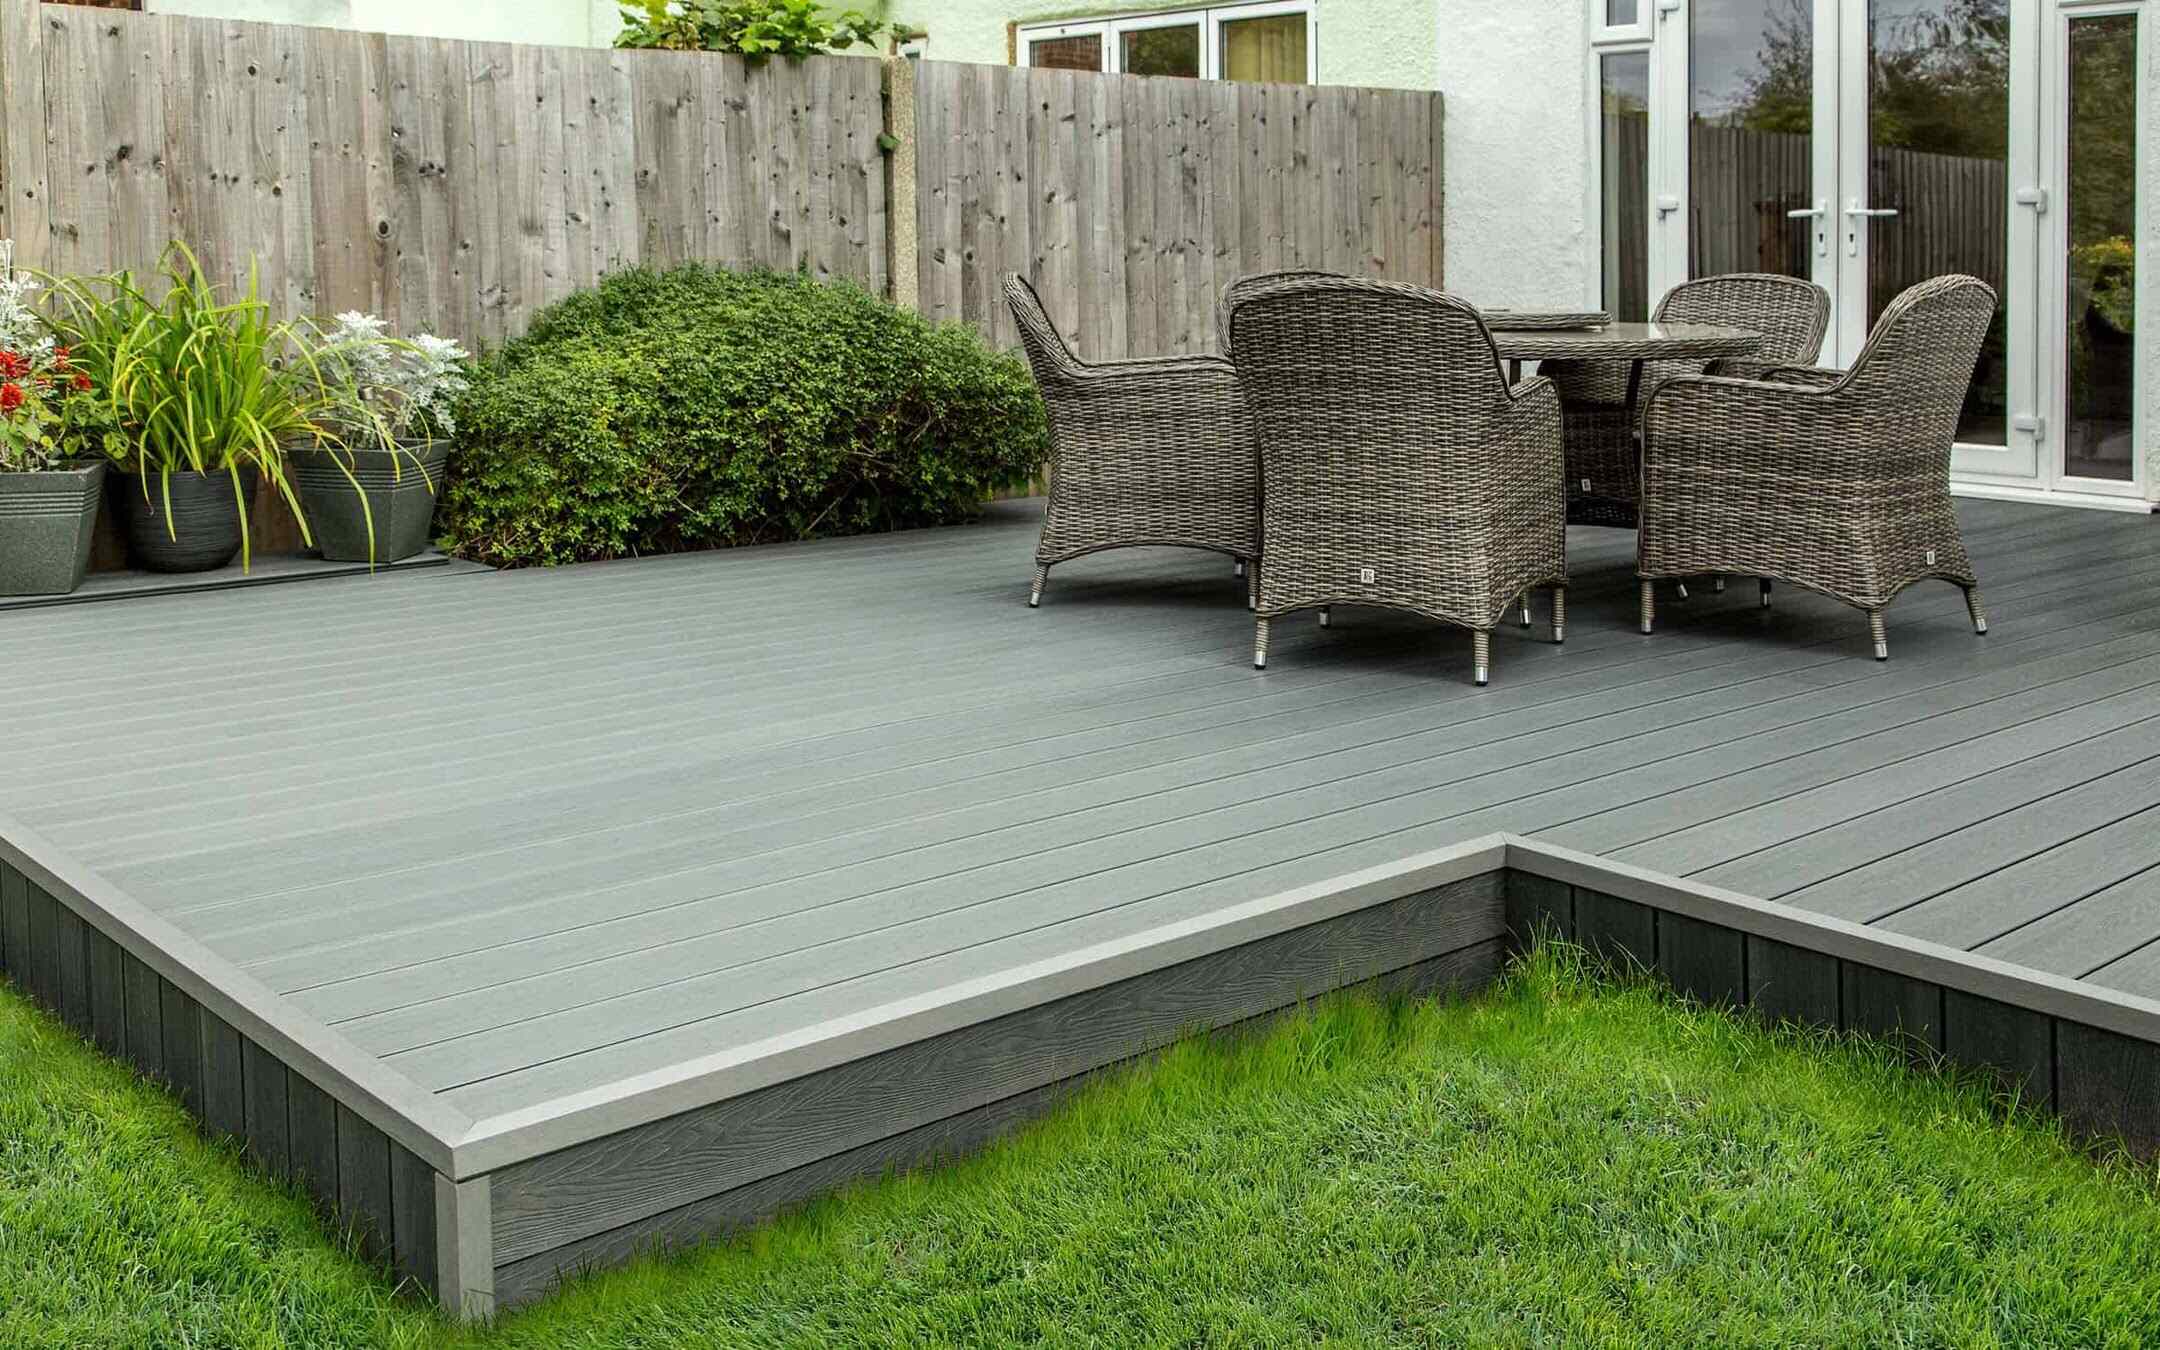 How To Install Composite Decking Over An Existing Deck